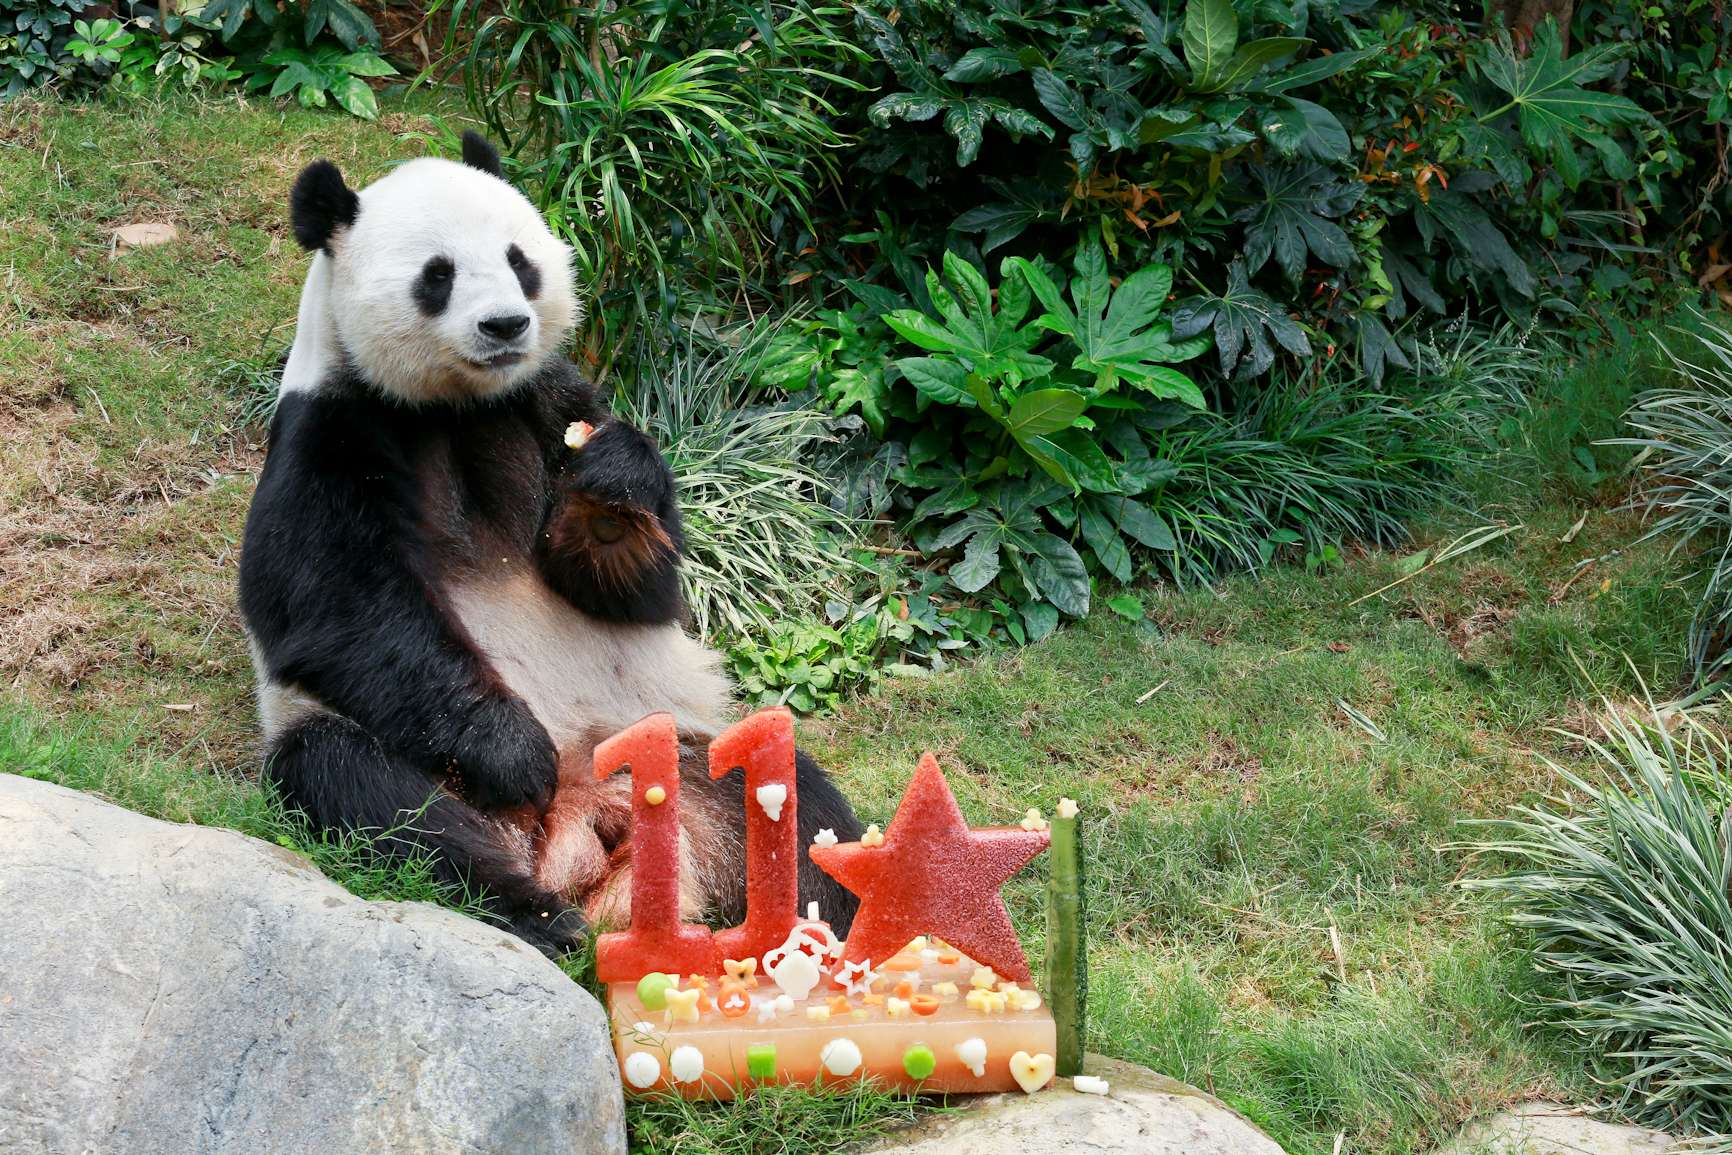 Le Le at his birthday party at Ocean Park, with Ying Ying’s absence sparking suggestions she was pregnant. Photo: SCMP Pictures